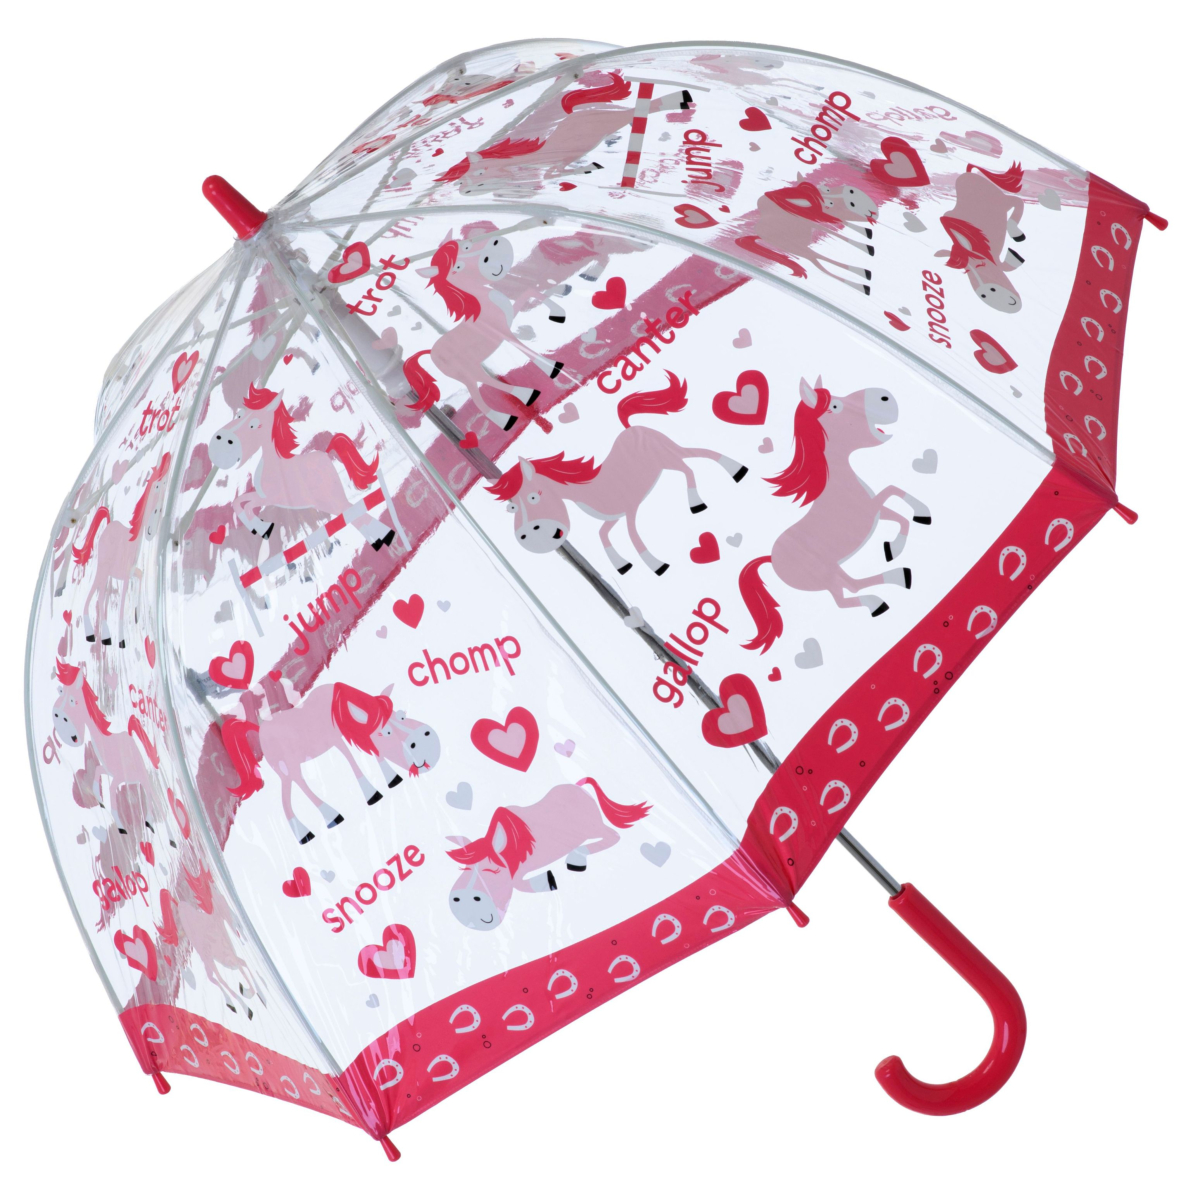 Bugzz PVC Dome Umbrella for Children - Ponies and Hearts